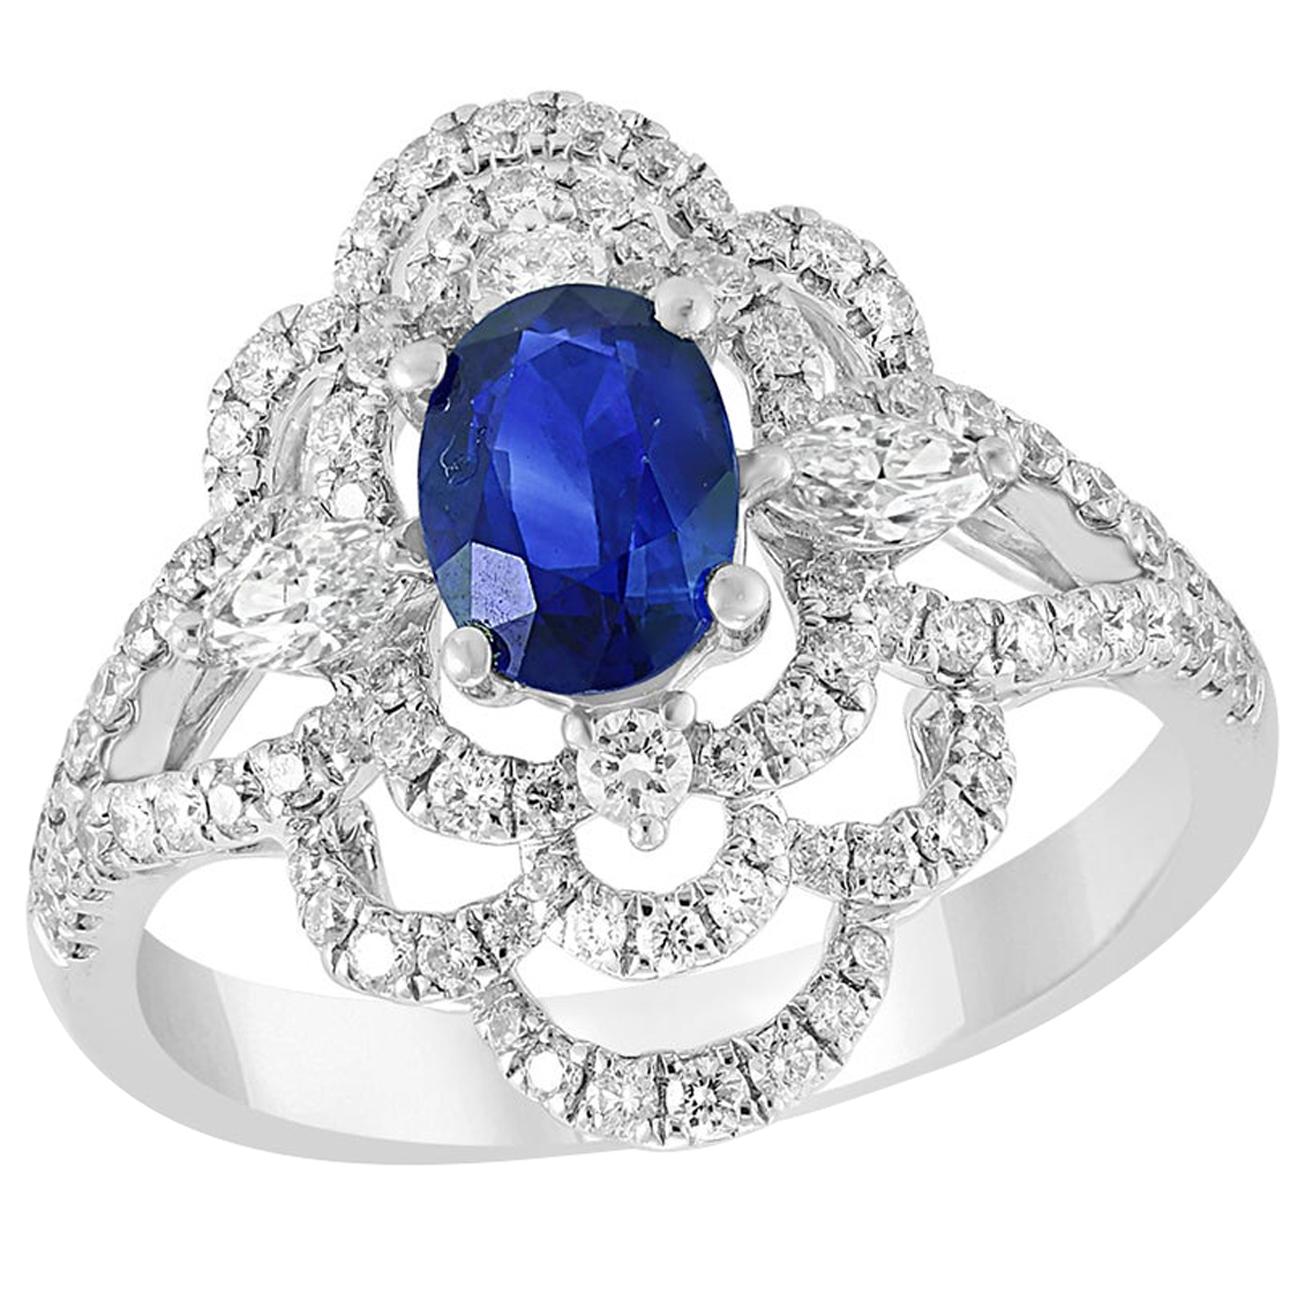 Grandeur 0.97 Carat Oval Sapphire and Diamond Engagement Ring in 18K White Gold For Sale